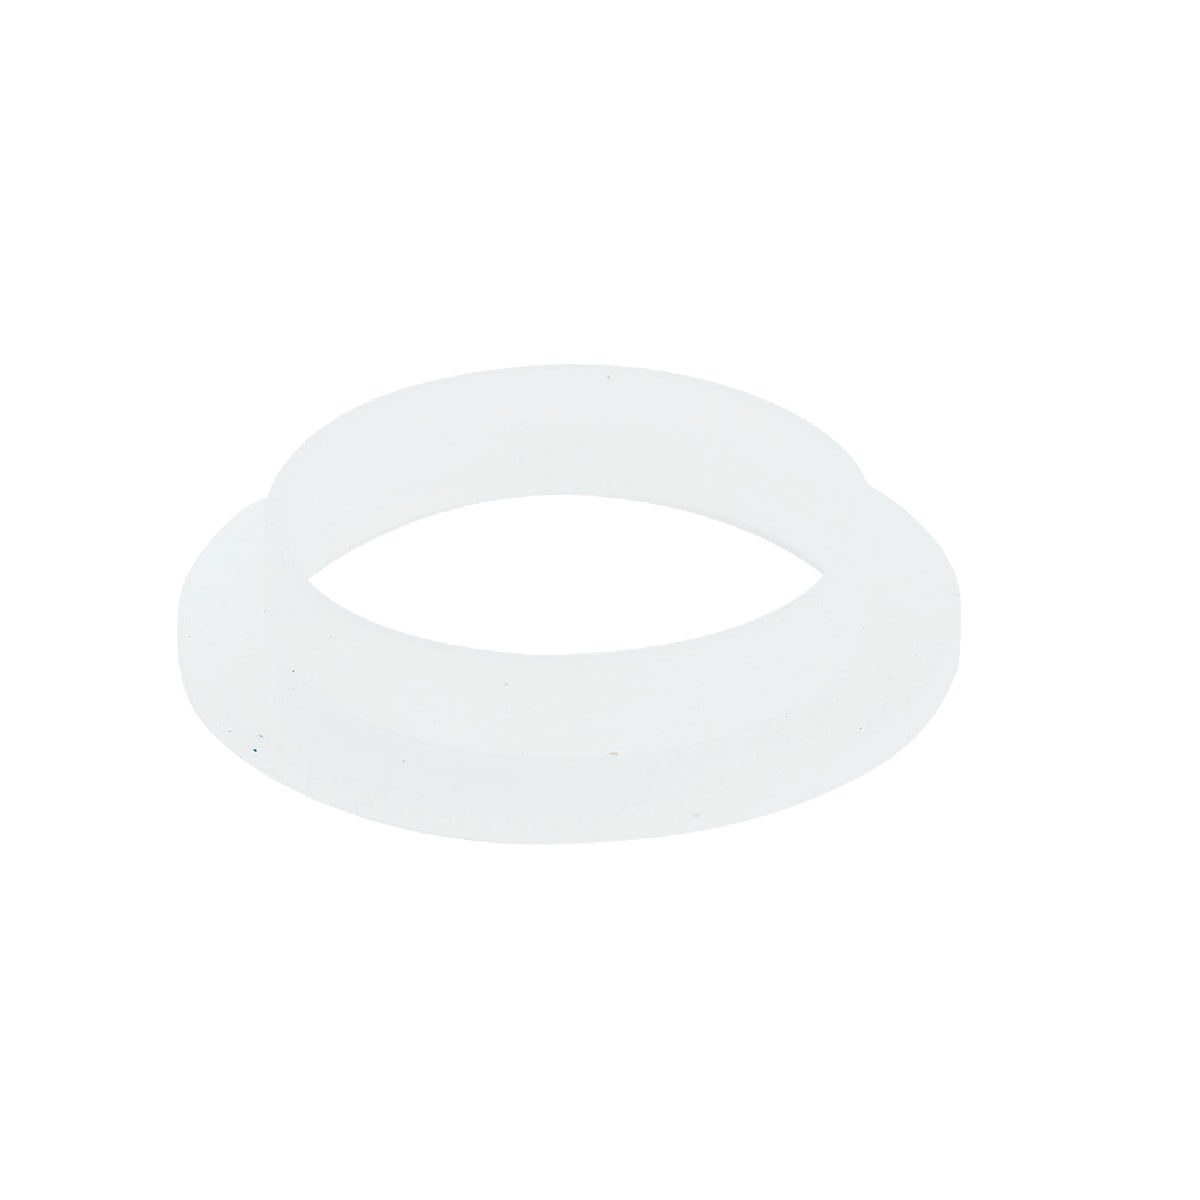 Item 415472, Polyethylene with flange for 1-1/2 In. slip-joint nuts.